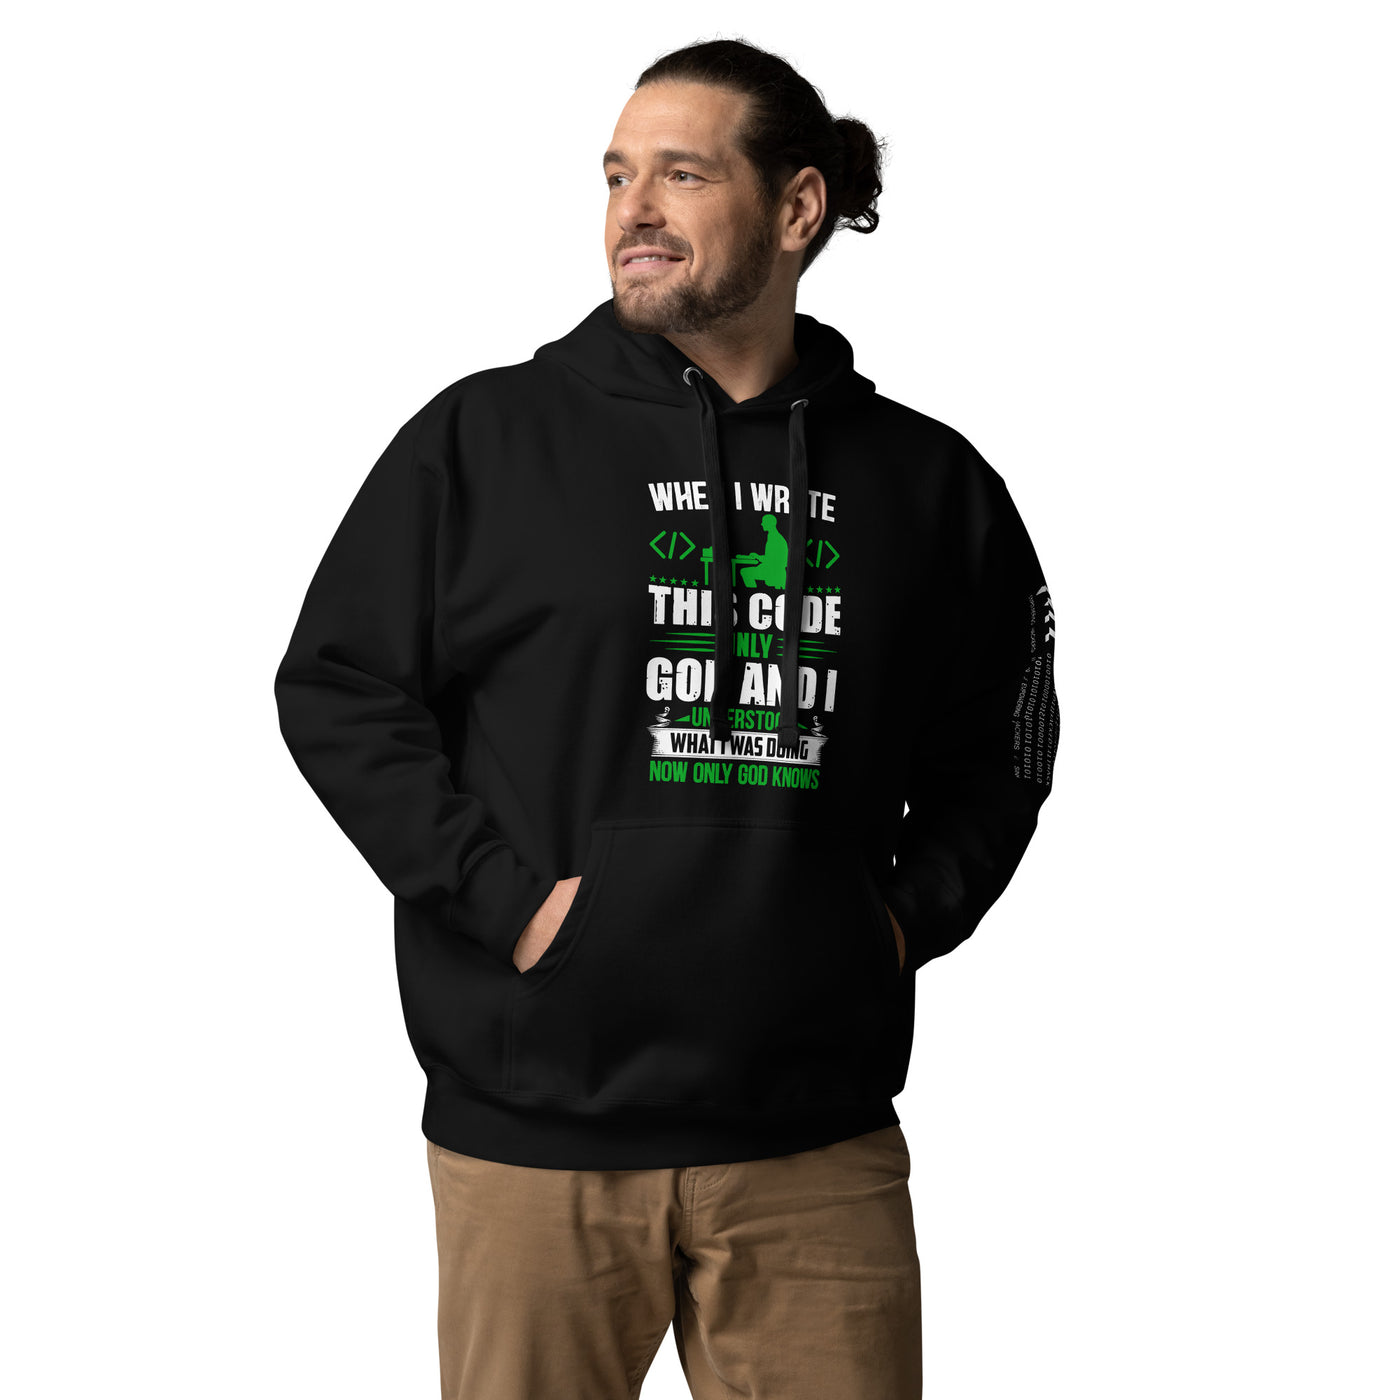 When I Wrote this code, only God and I Understood - Unisex Hoodie